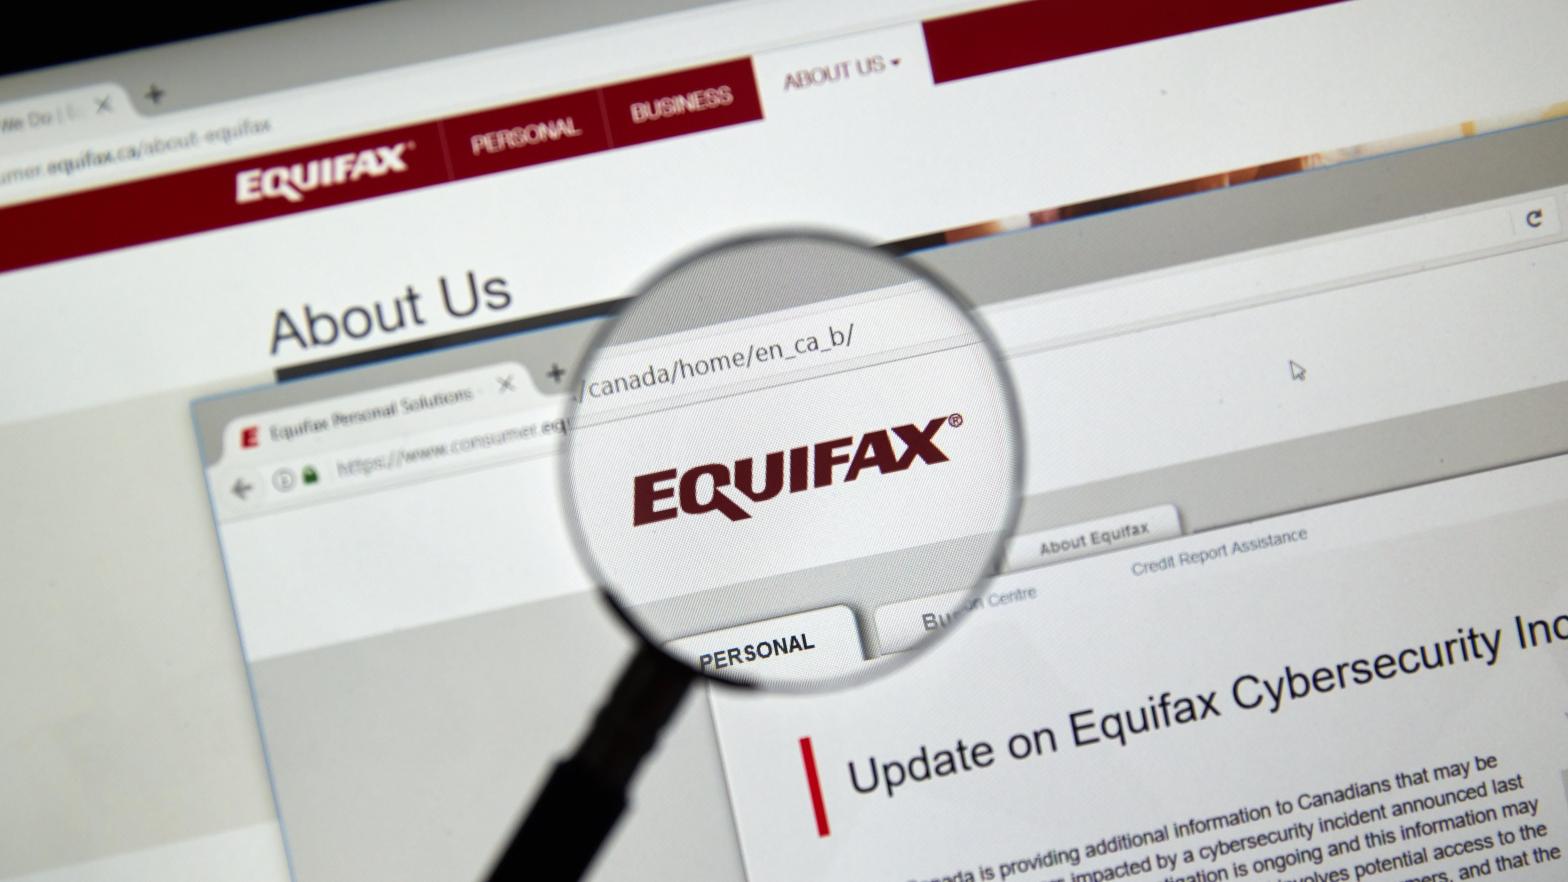 Equifax's The Work Number is software that collects detailed employment records from more than 2.5 million employers. (Image: dennizn, Shutterstock)